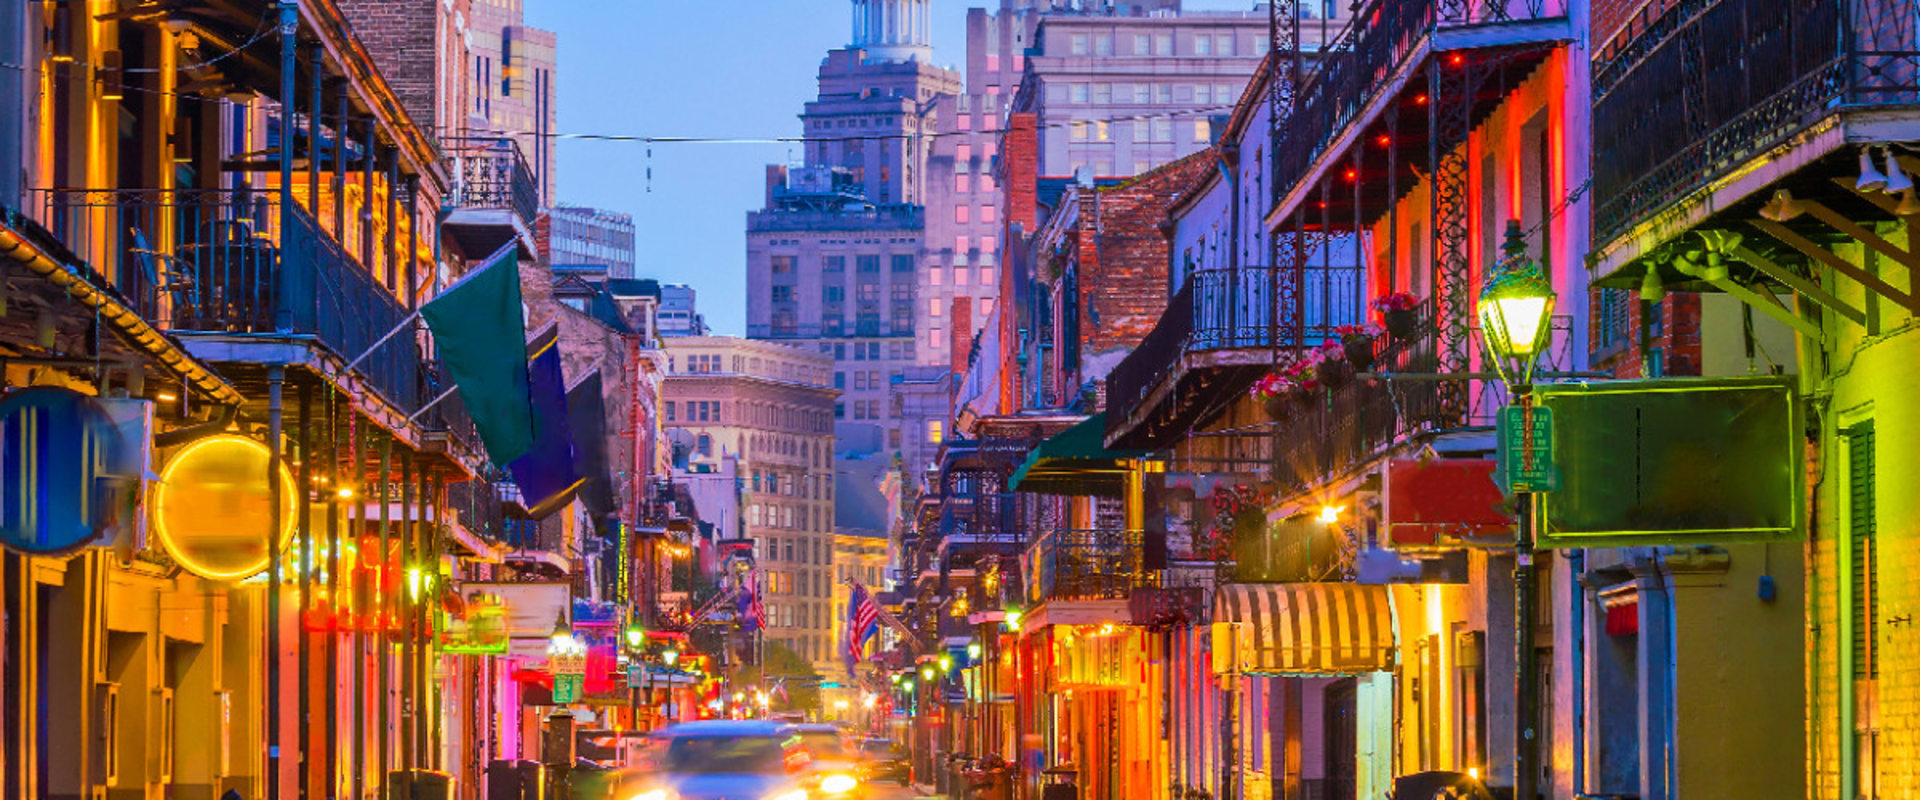 15 Best Things to Do in New Orleans Besides Eating and Drinking